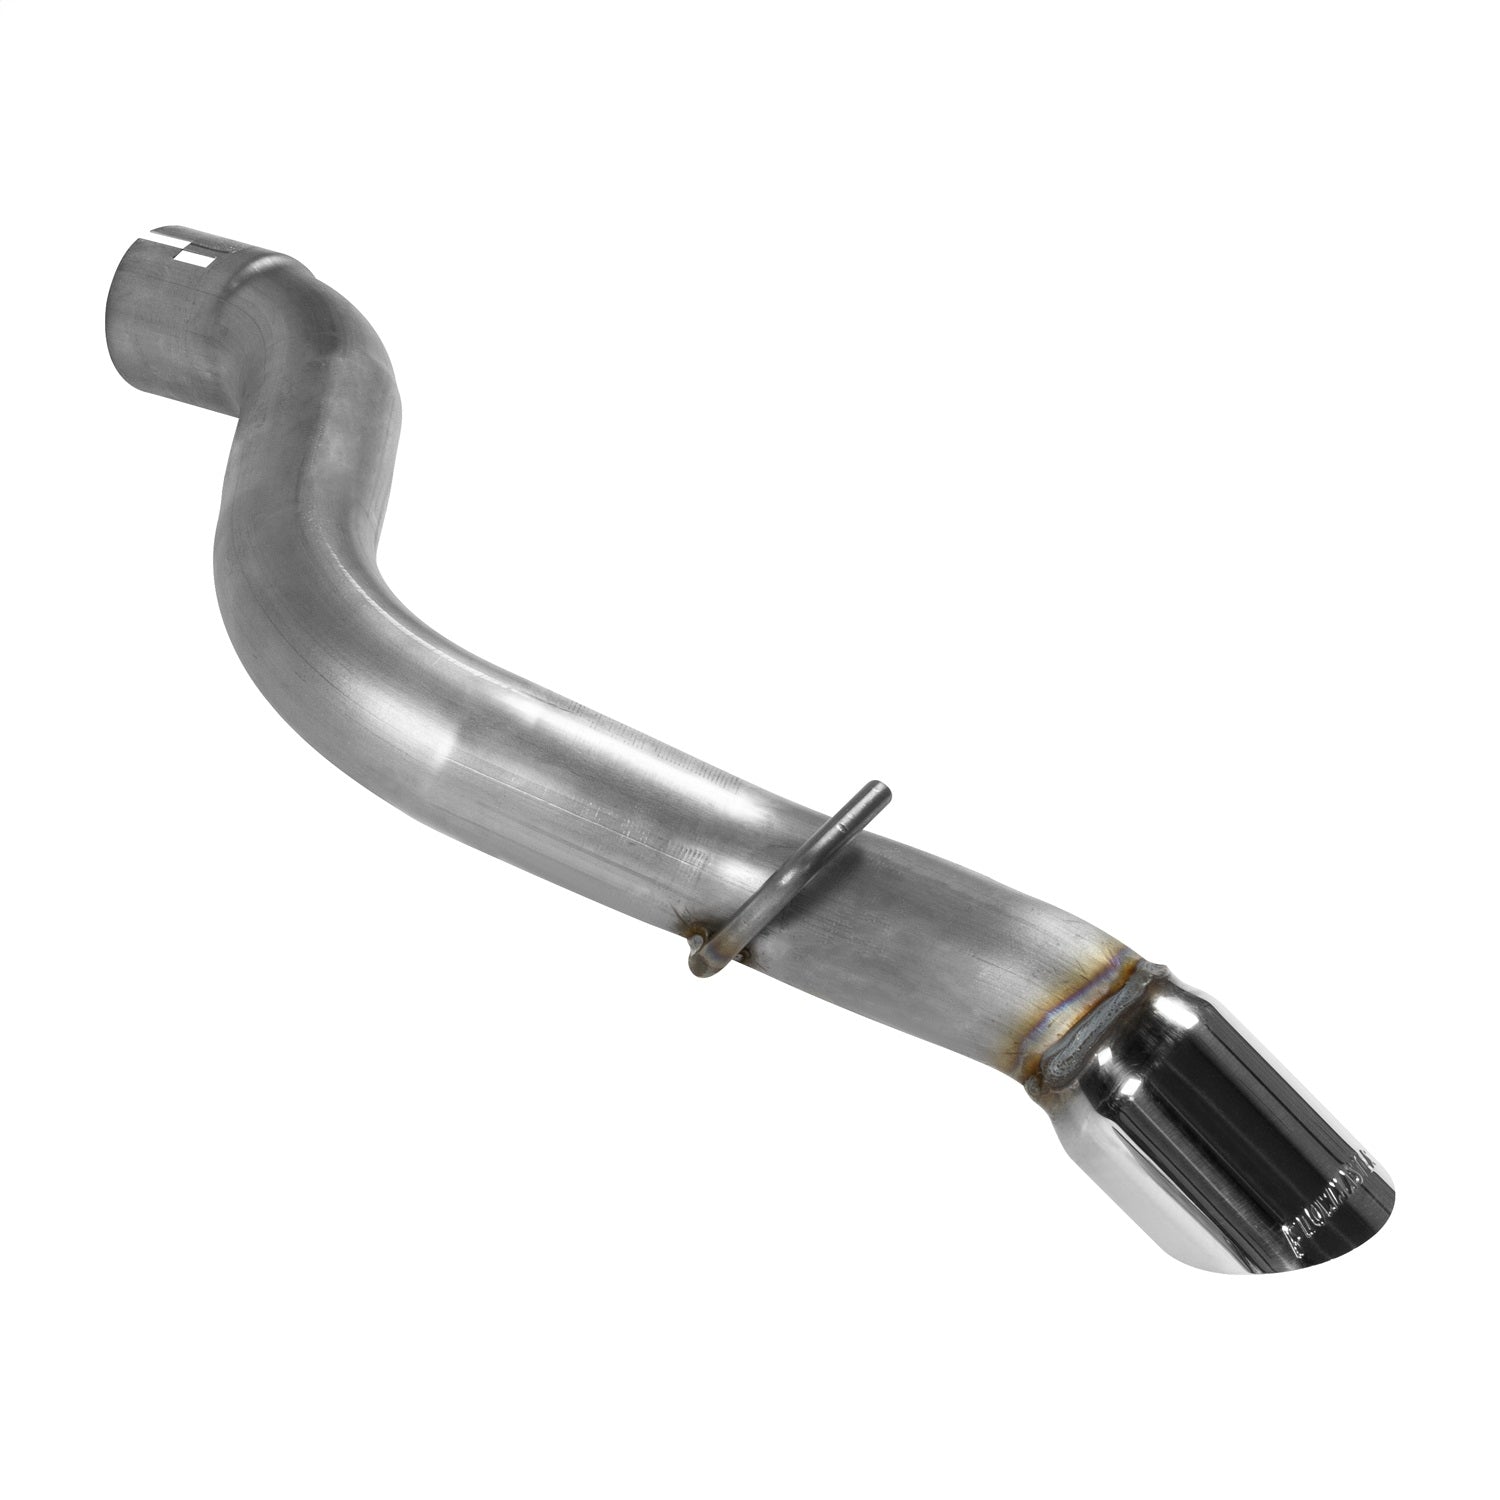 Flowmaster 817837 American Thunder Axle Back Exhaust System Fits Wrangler (JL)